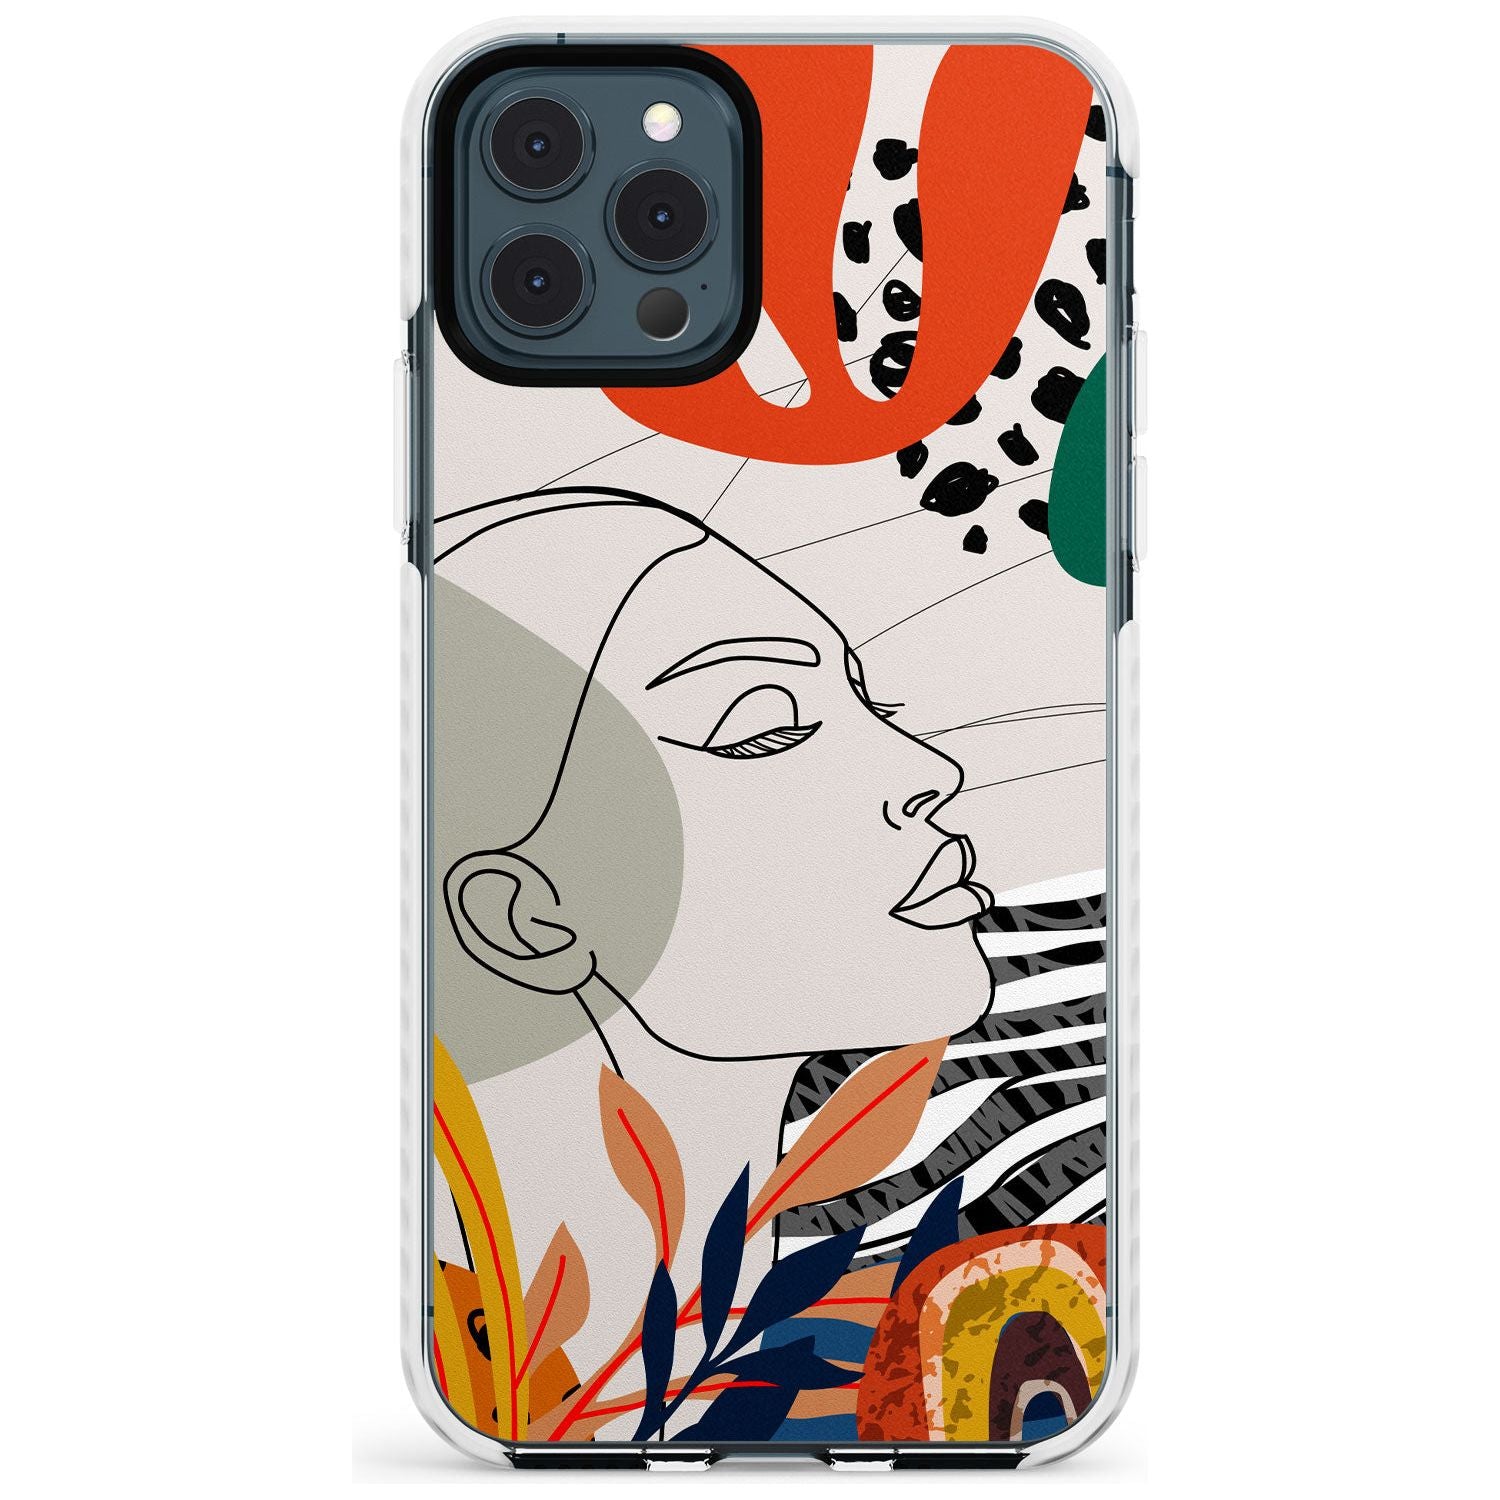 Girl Gone Wild Slim TPU Phone Case for iPhone 11 Pro Max